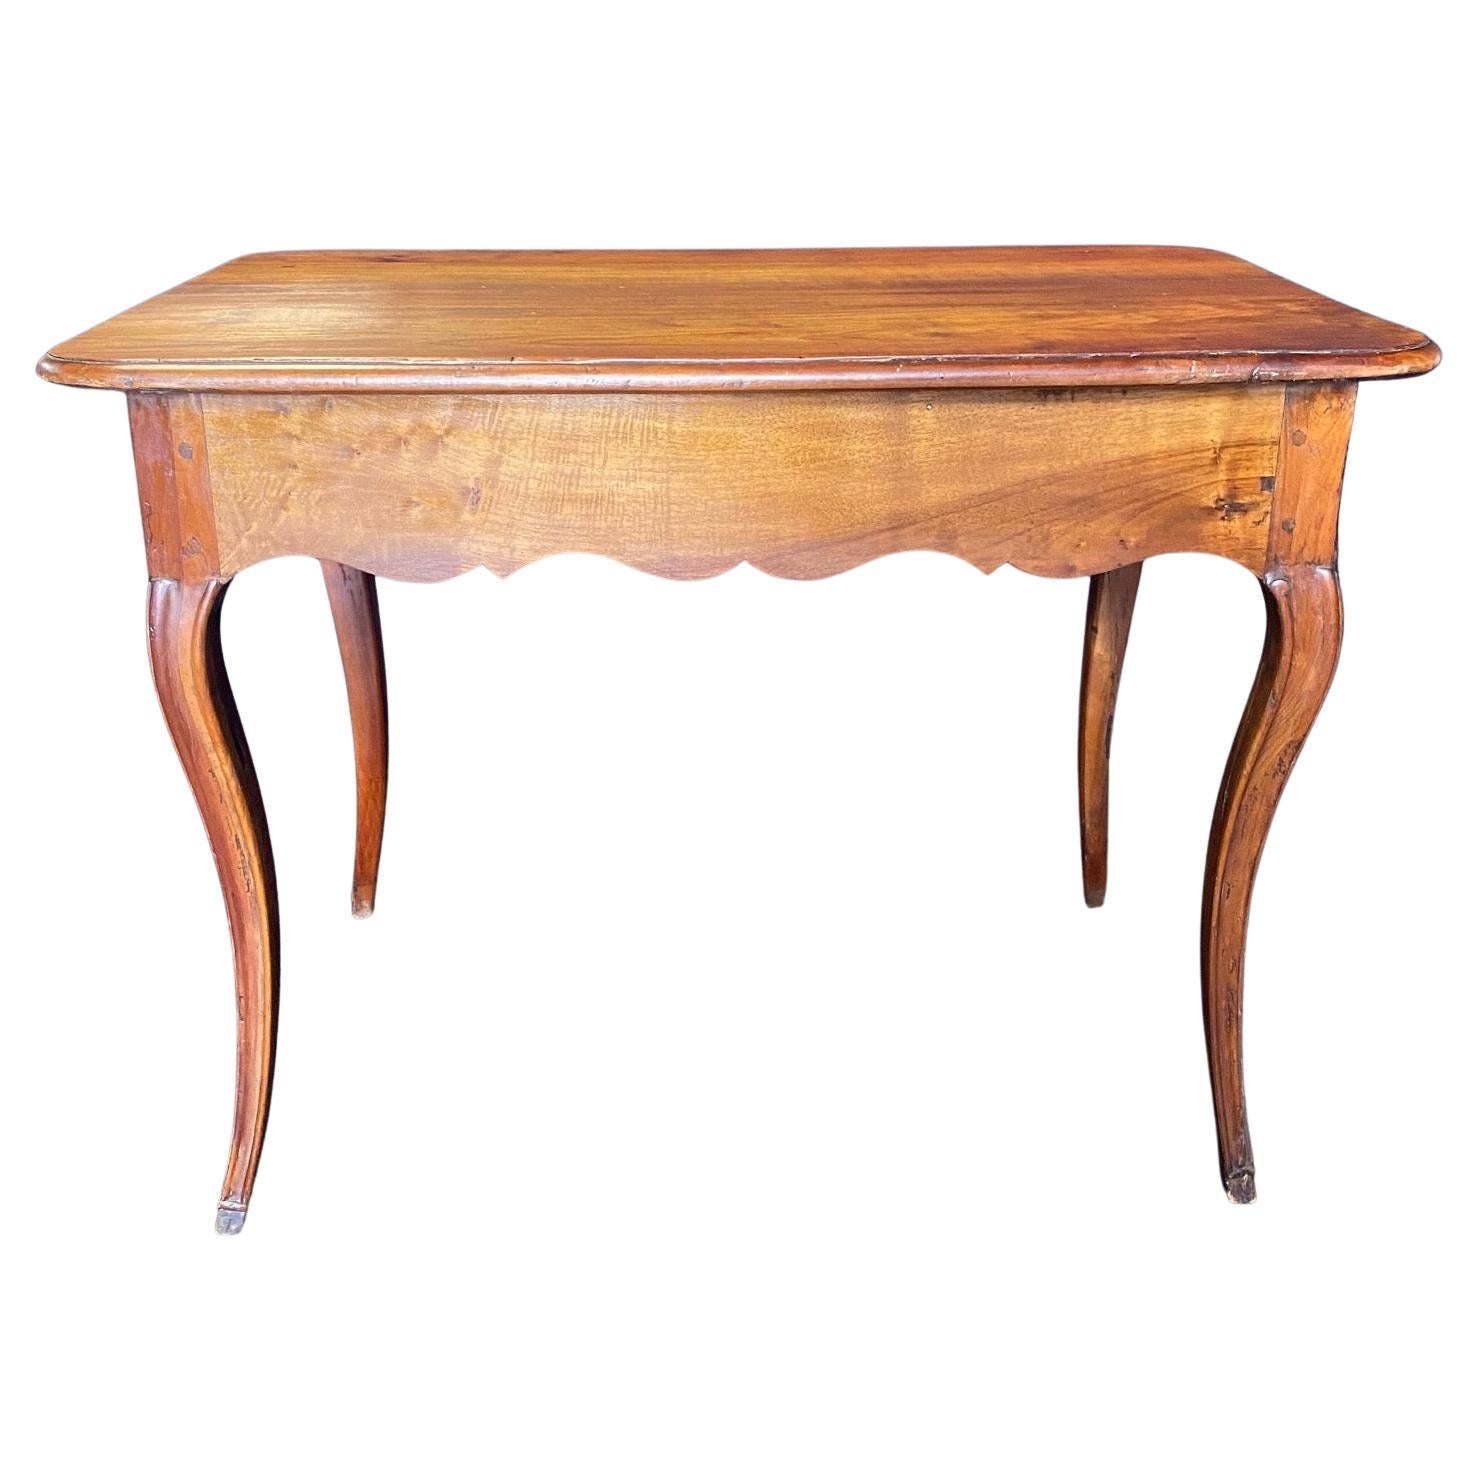 19th century cherry French side table or desk from the late 19th century; a beautiful example of the French Country design aesthetic. The table or desk has a beautifully carved scalloped apron on all four sides, making it ideal to sit in the center